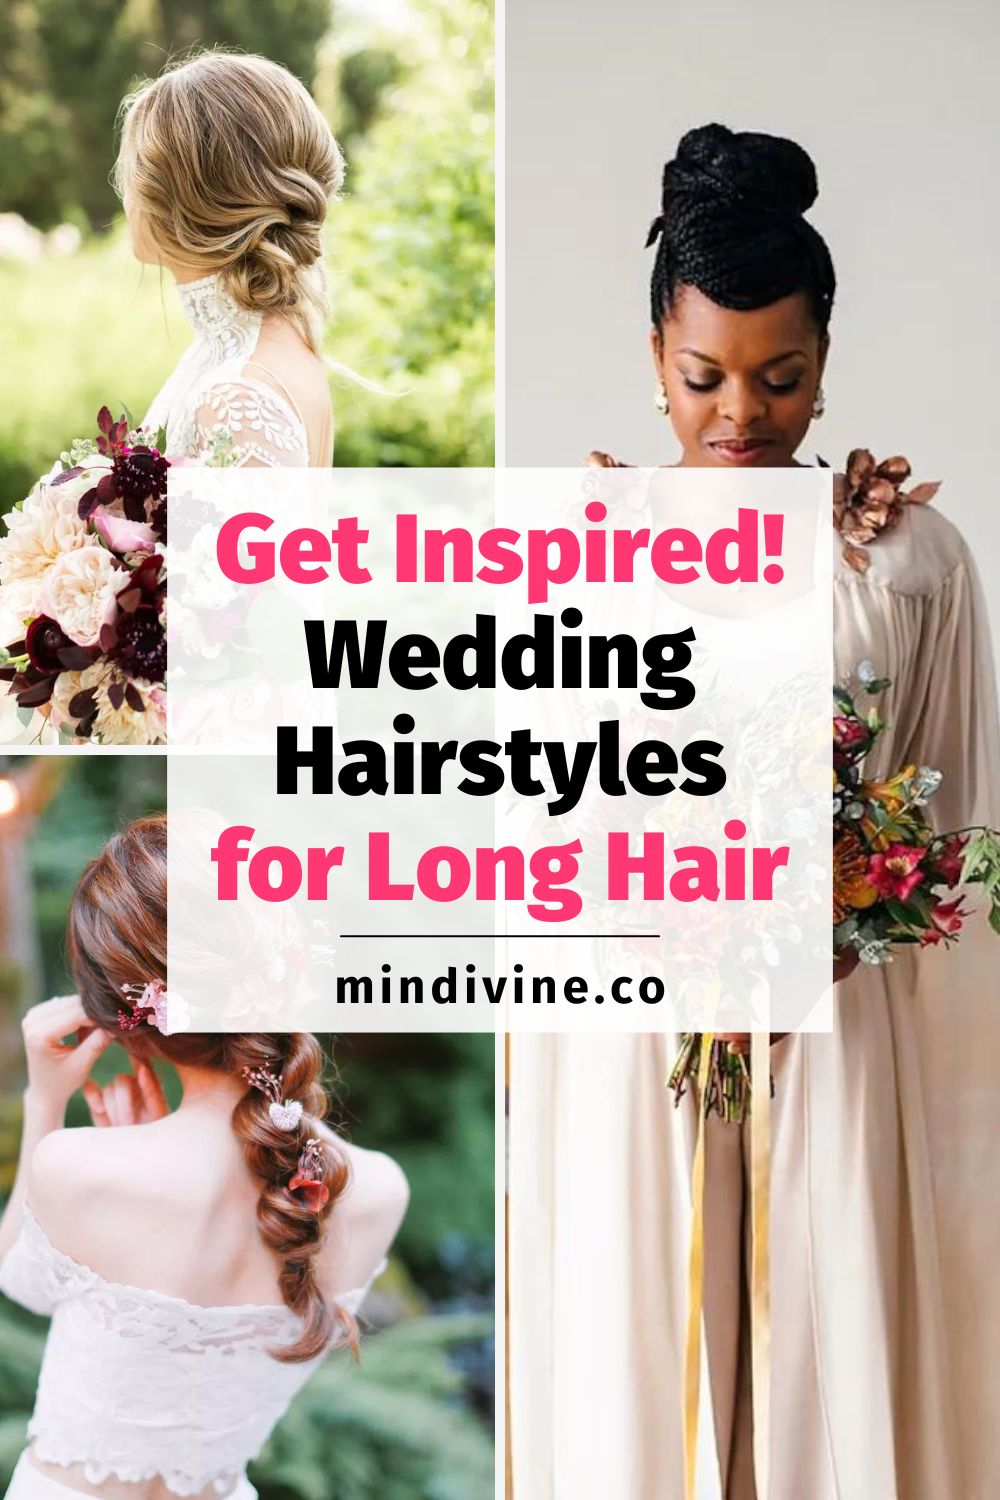 3 Stunning Wedding Hairstyles for Long Hair